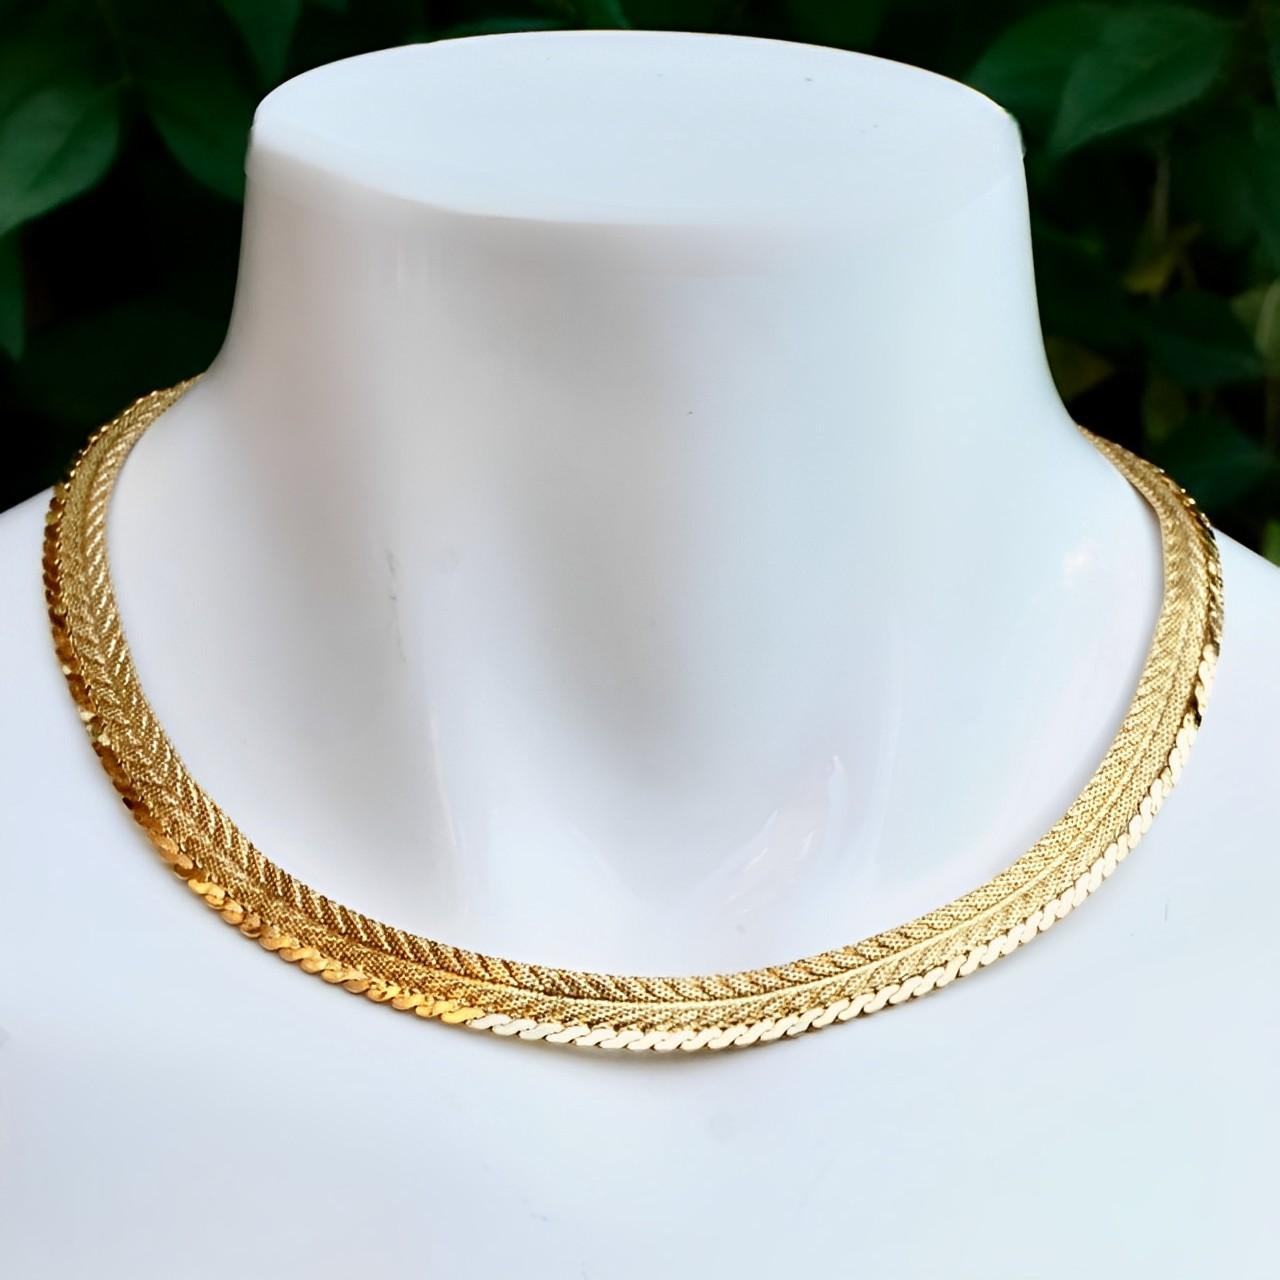 Beautiful bright gold plated chevron design mesh necklace, with a shiny serpentine chain edging. Measuring length approximately 38.5 cm / 15.1 inches plus an extension chain of 5.5 cm / 2 inches, by width 9 mm / .35 inch. The necklace is in very